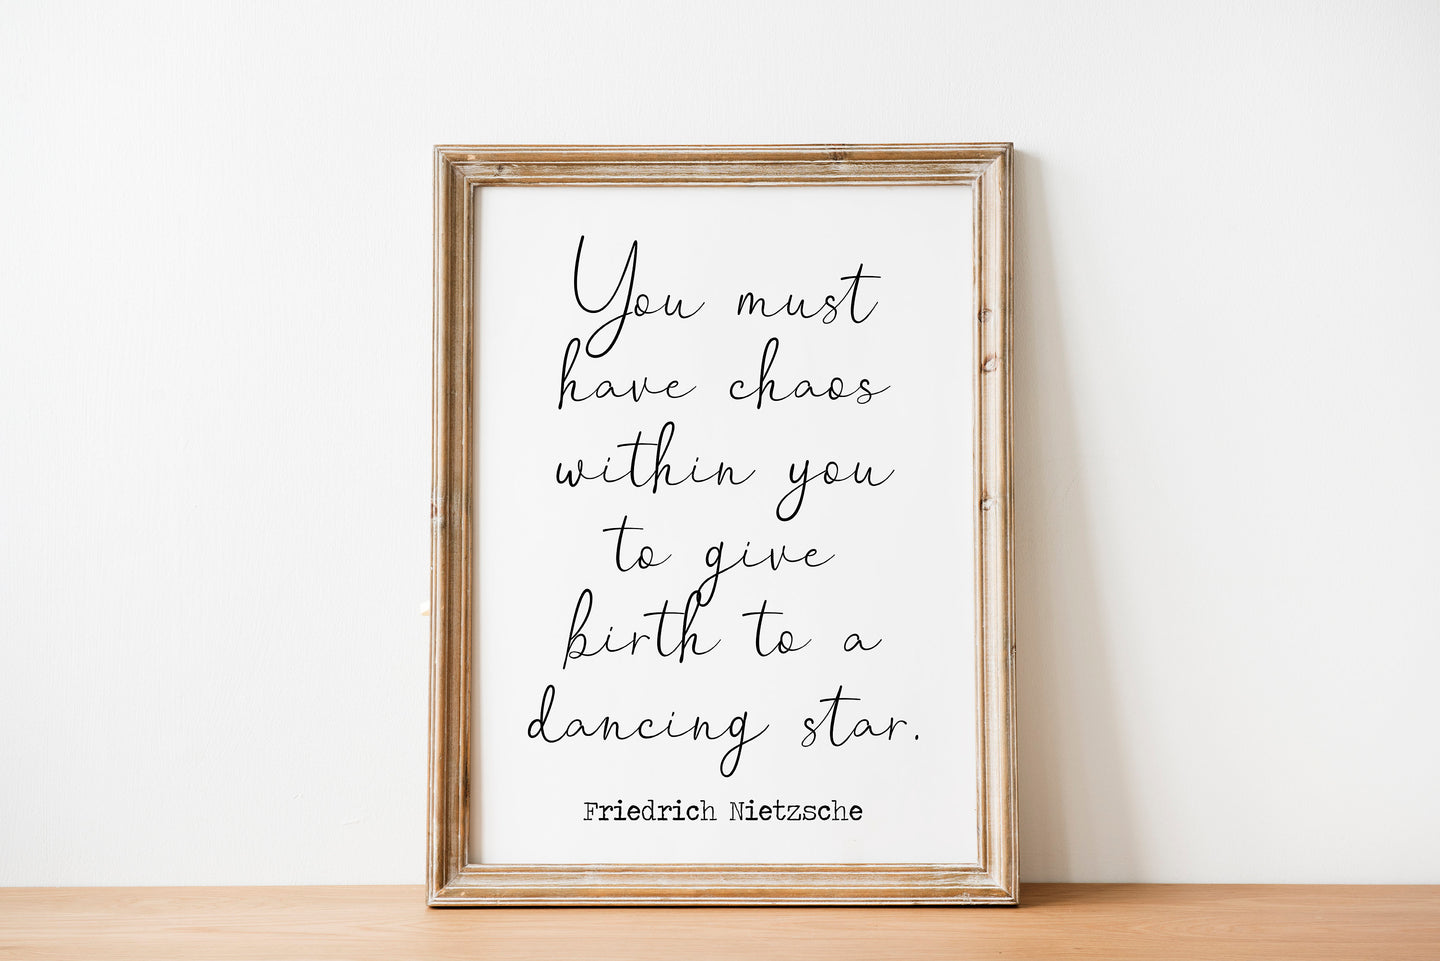 Nietzsche quote - You must have chaos within you to give birth to a dancing star - philosophy print - office decor - unframed print